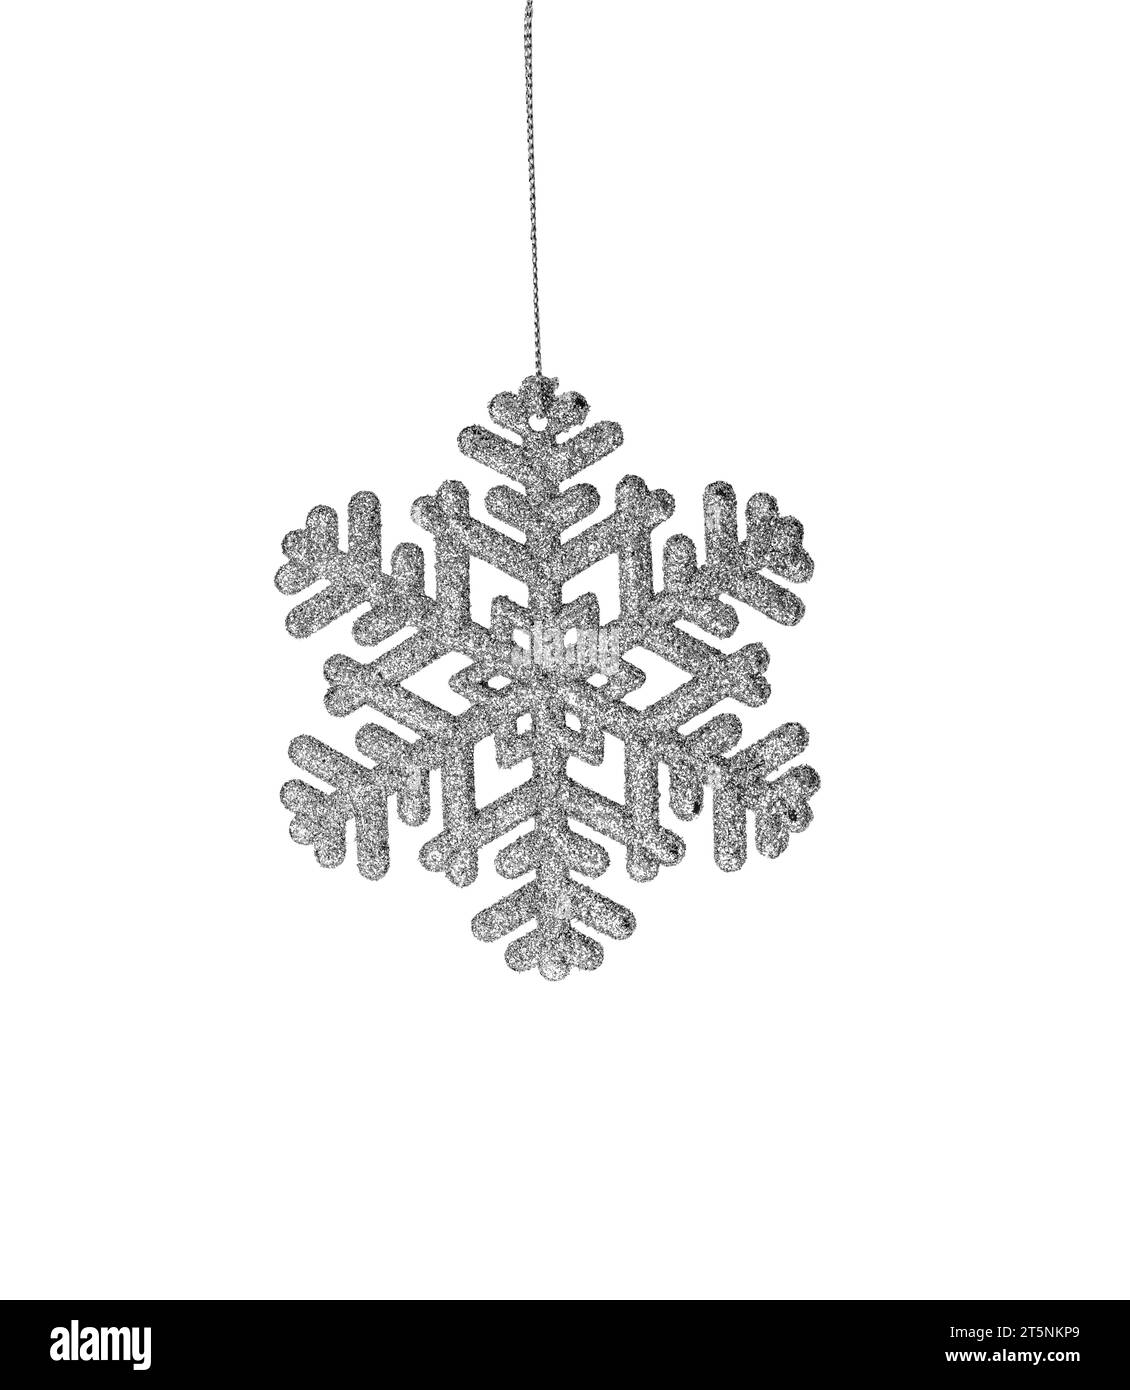 Hanging Silver Glitter Snowflake isolated on white background. Winter ornament Stock Photo